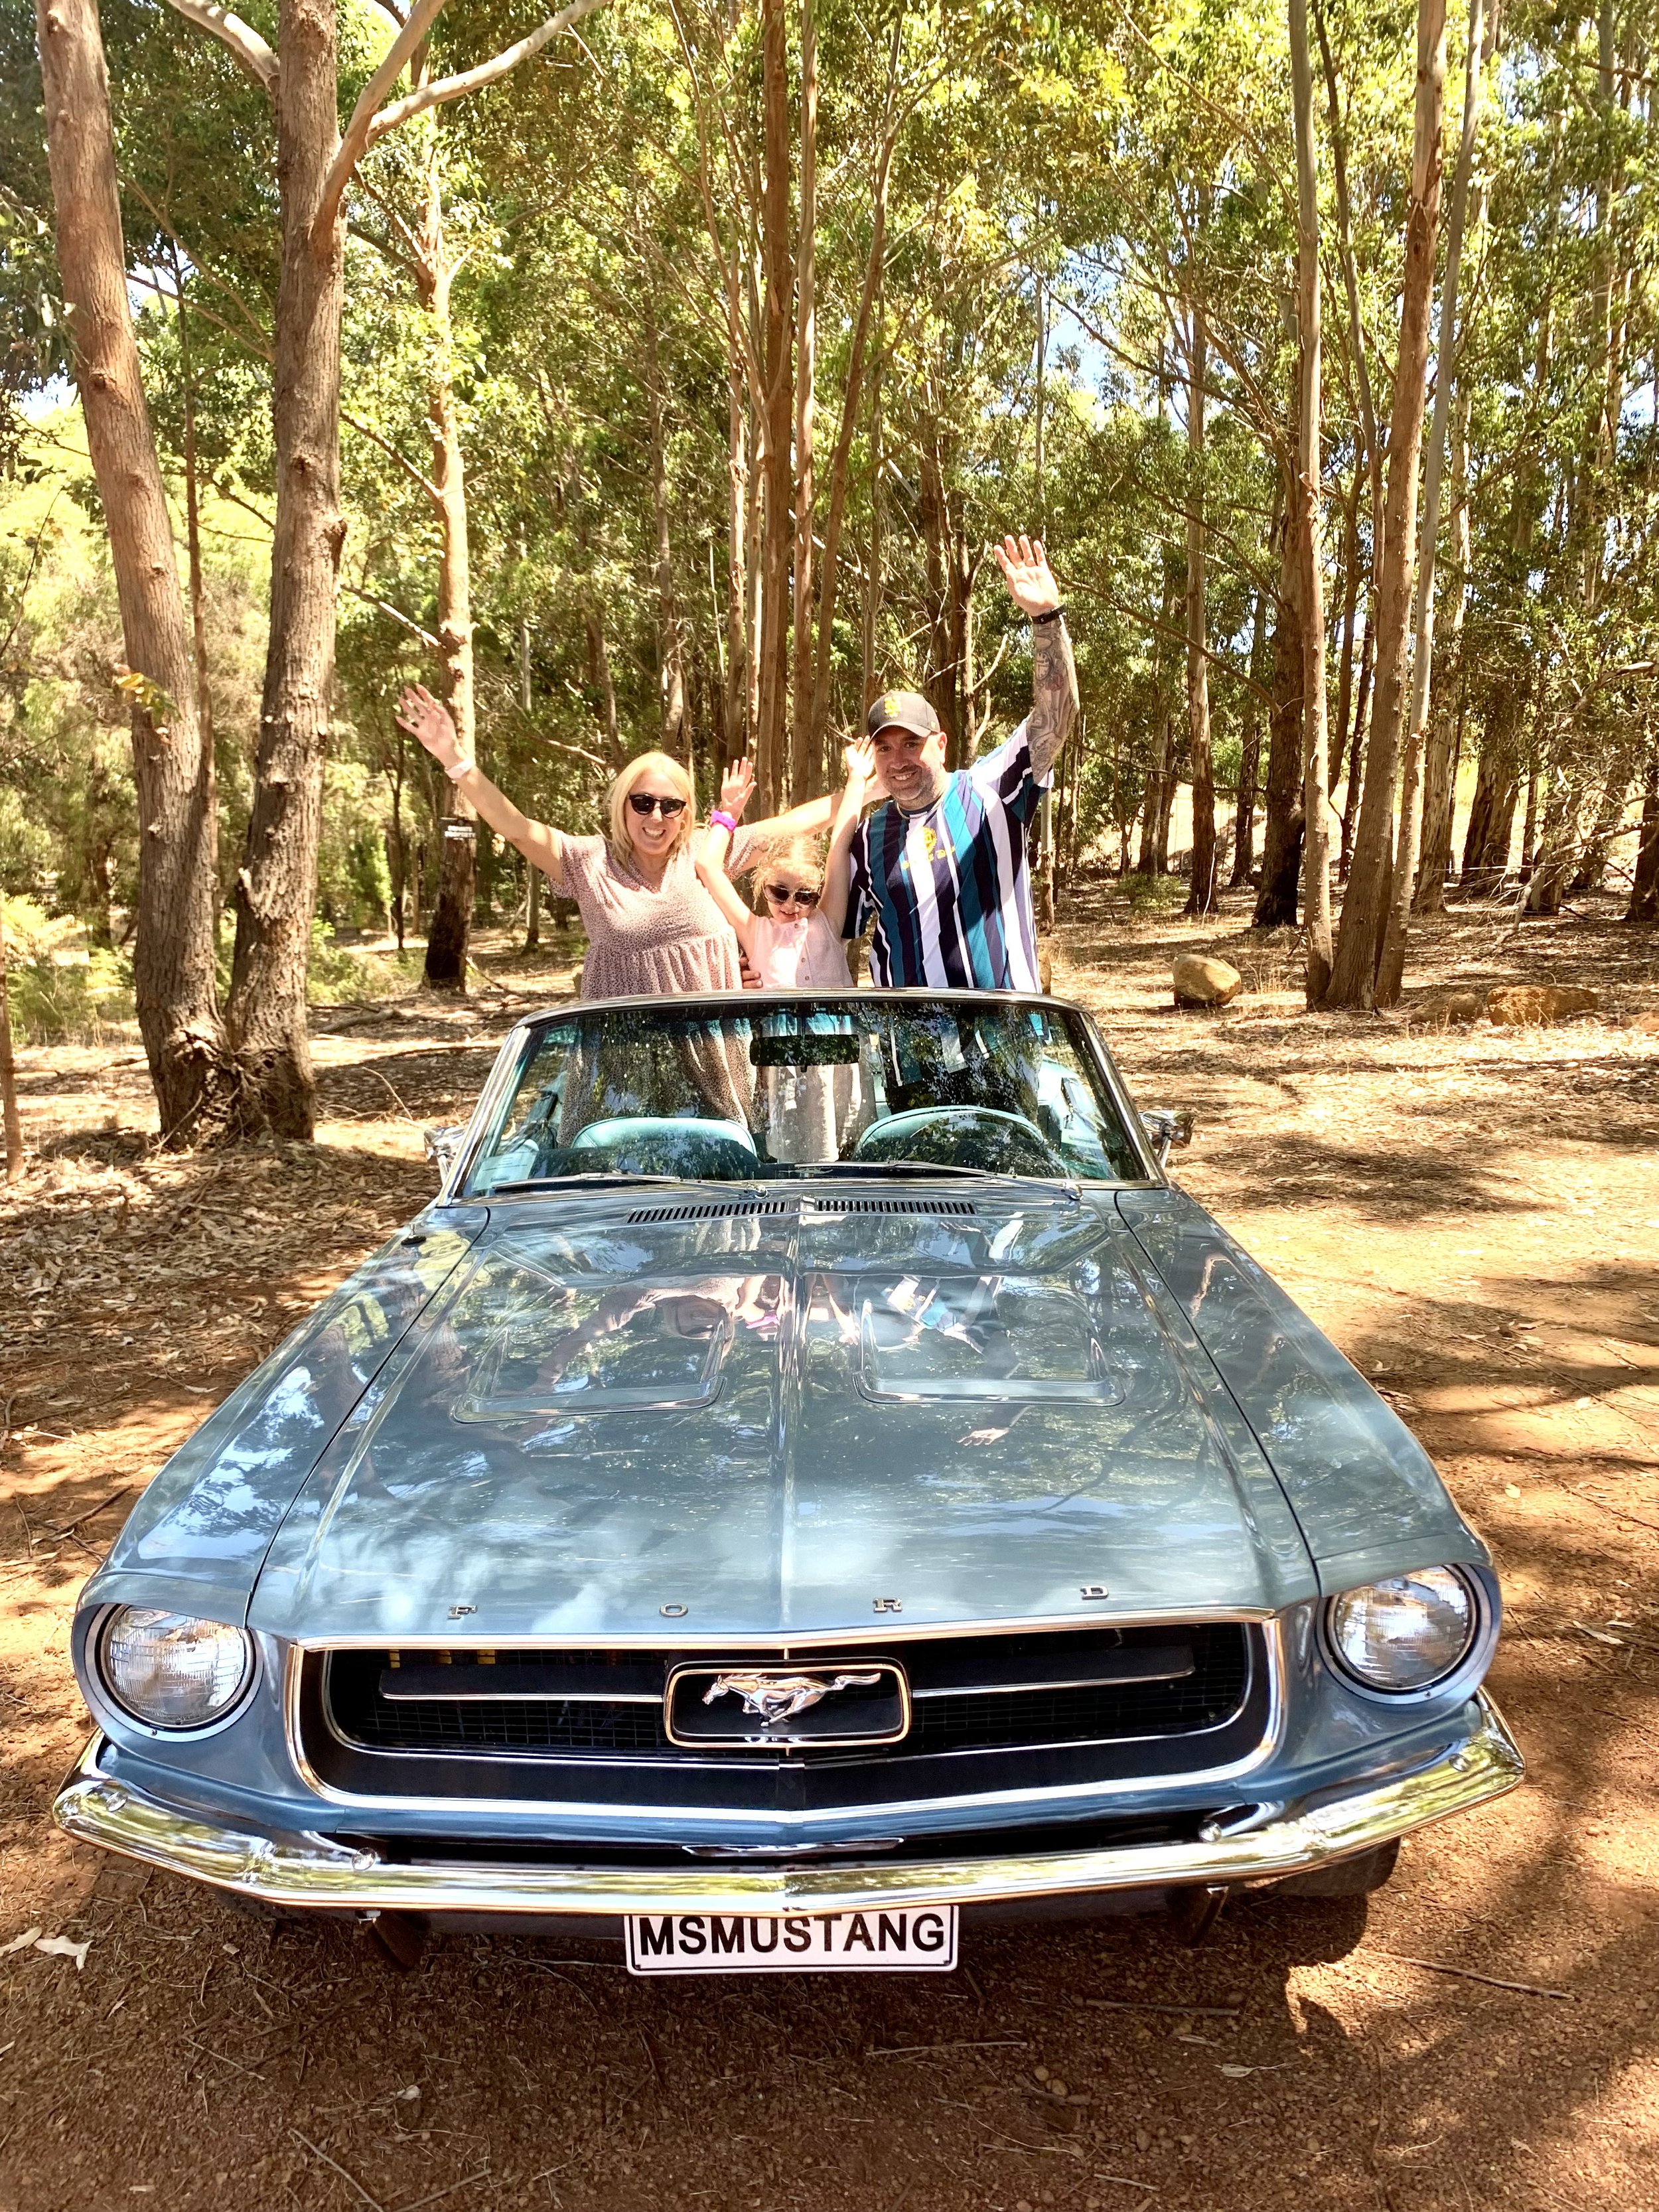 birthday-event-mustang hire-classic car-wine tour-margaret river1.JPG